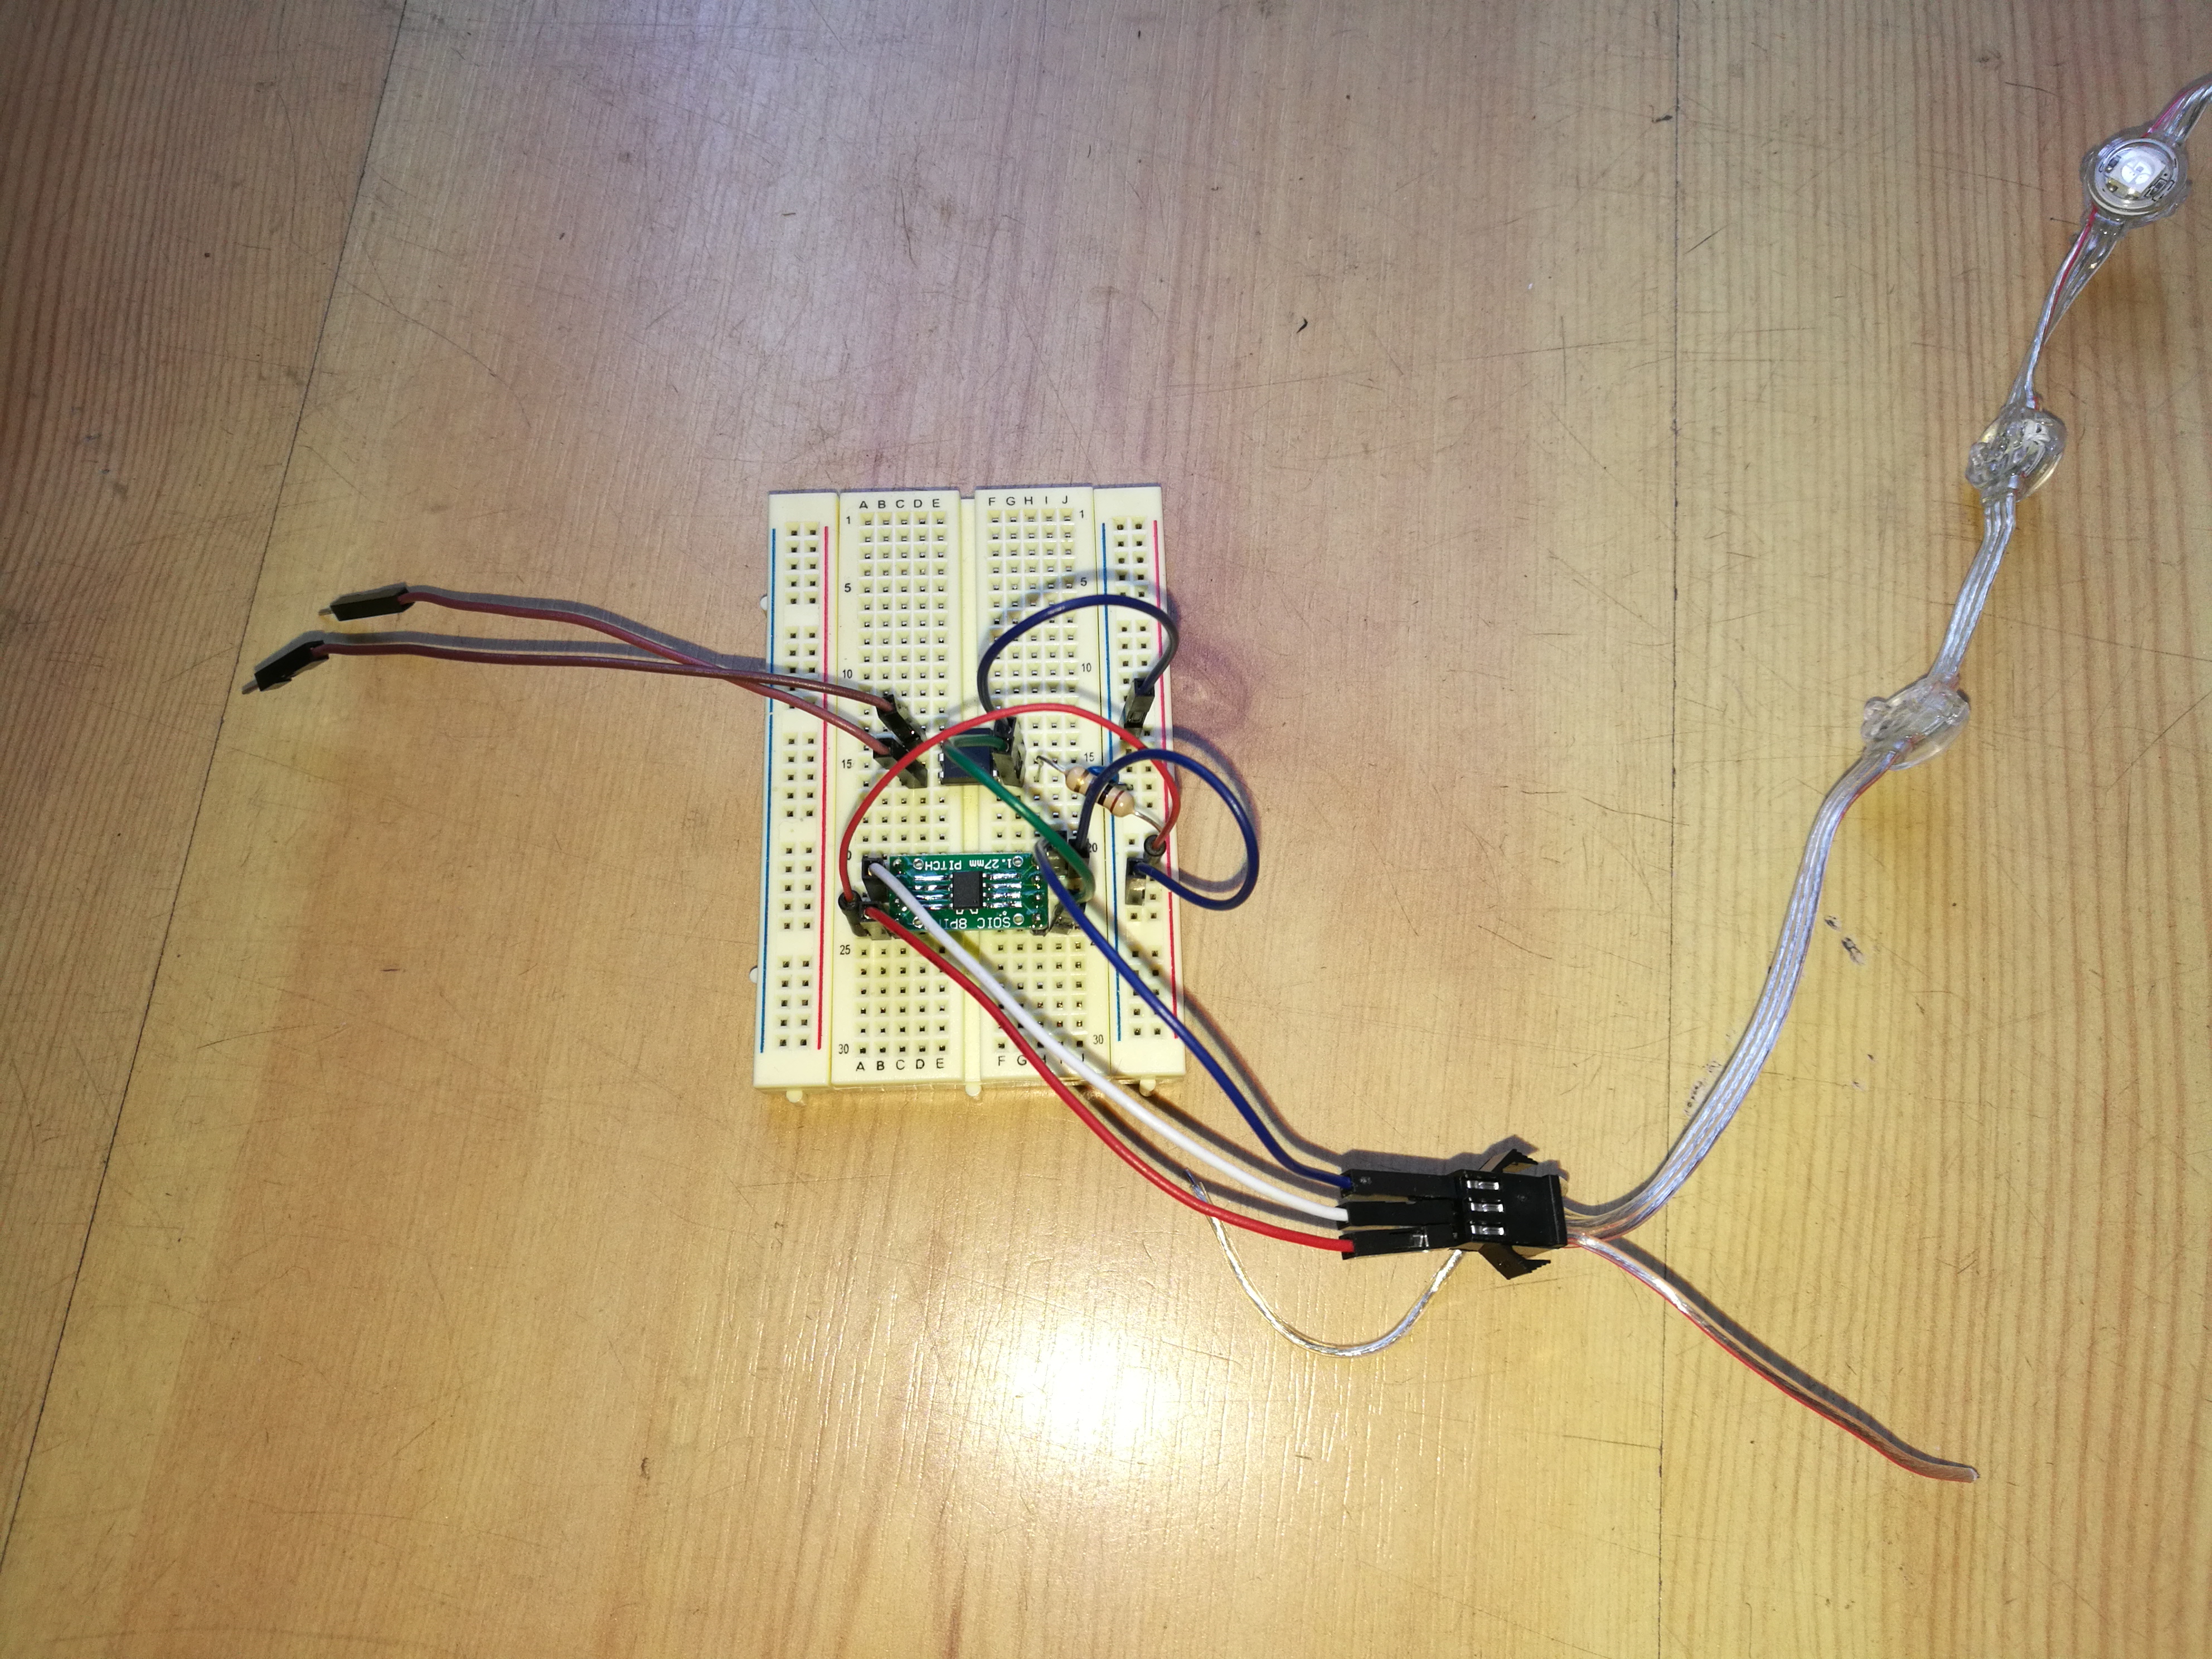 early breadboarded test of controlling a SSR through a WS2811 LED driver chip